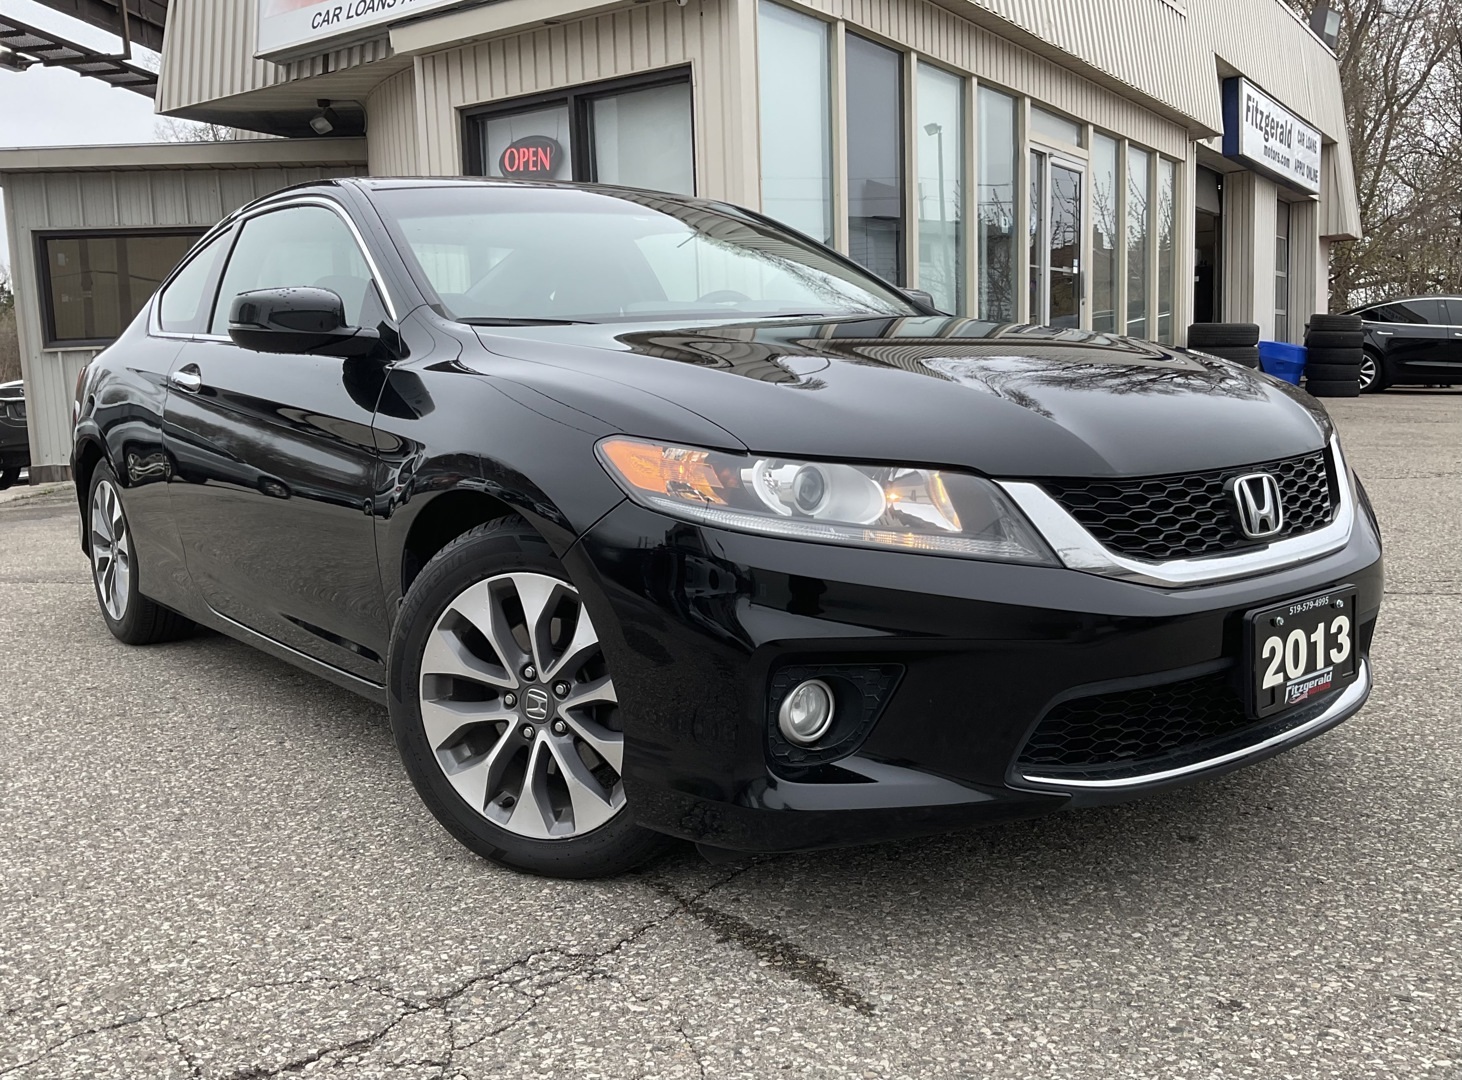 2013 Honda Accord EX Coupe 6-Spd MT - BACK-UP CAM! SUNROOF! HEATED S